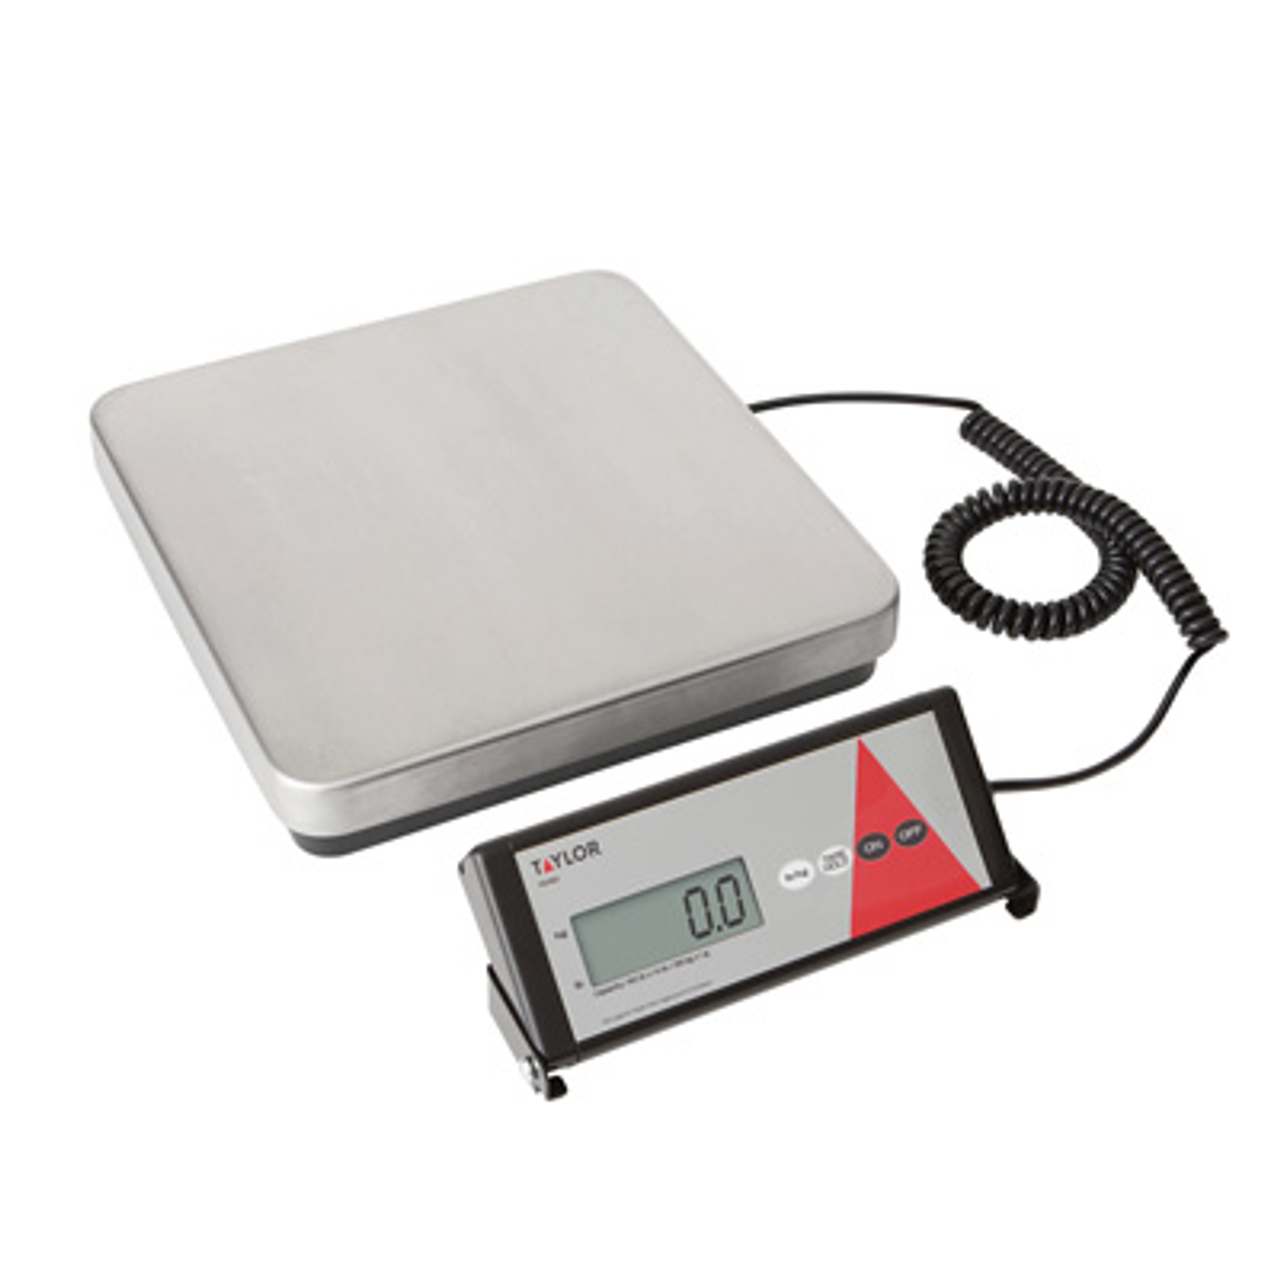 Scale Compact Digital 10 Pound - Taylor Instruments TE10FT